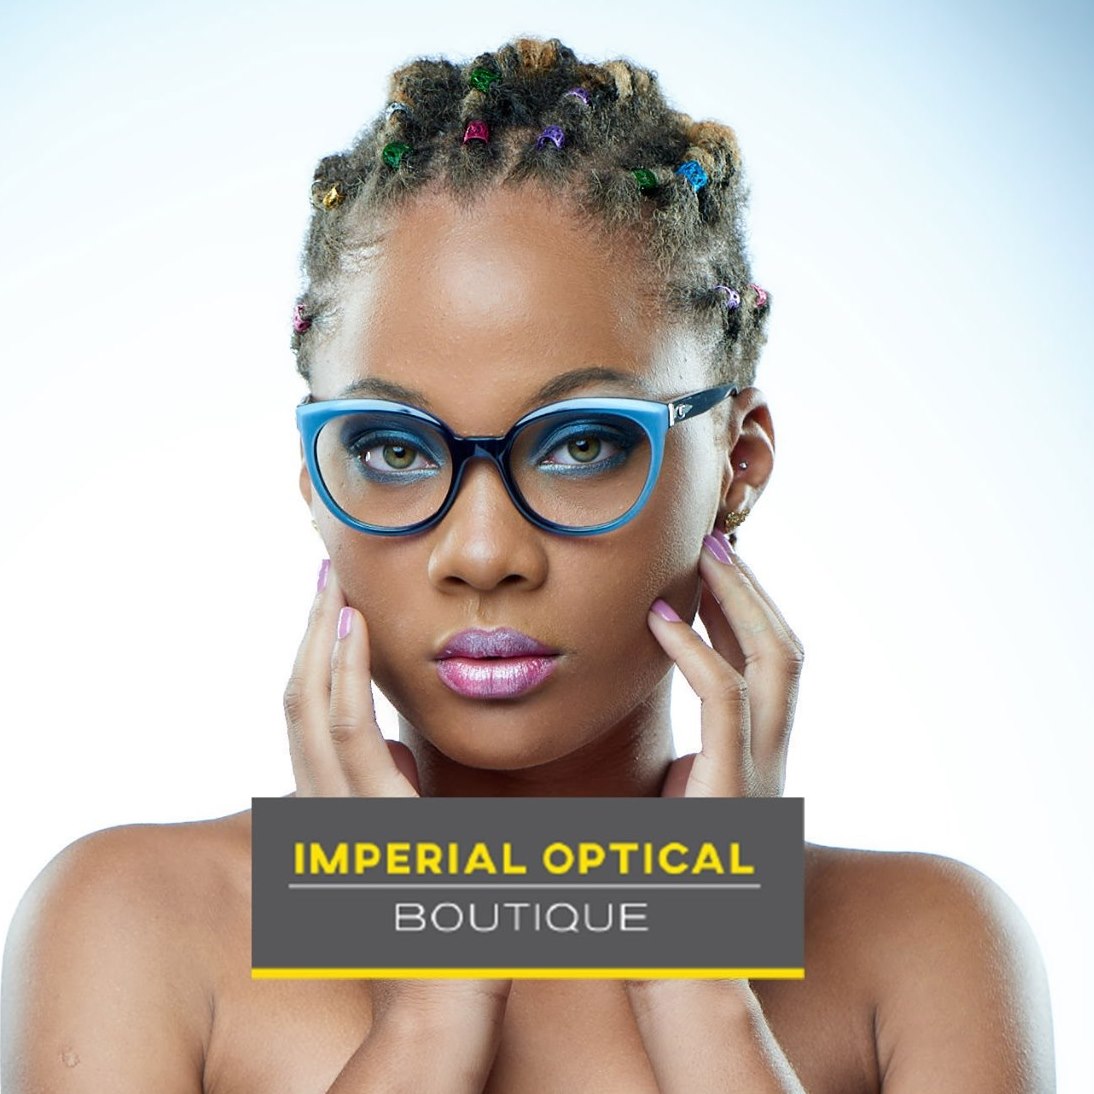 Imperial Optical Boutique – Sovereign North, 29 Barbican